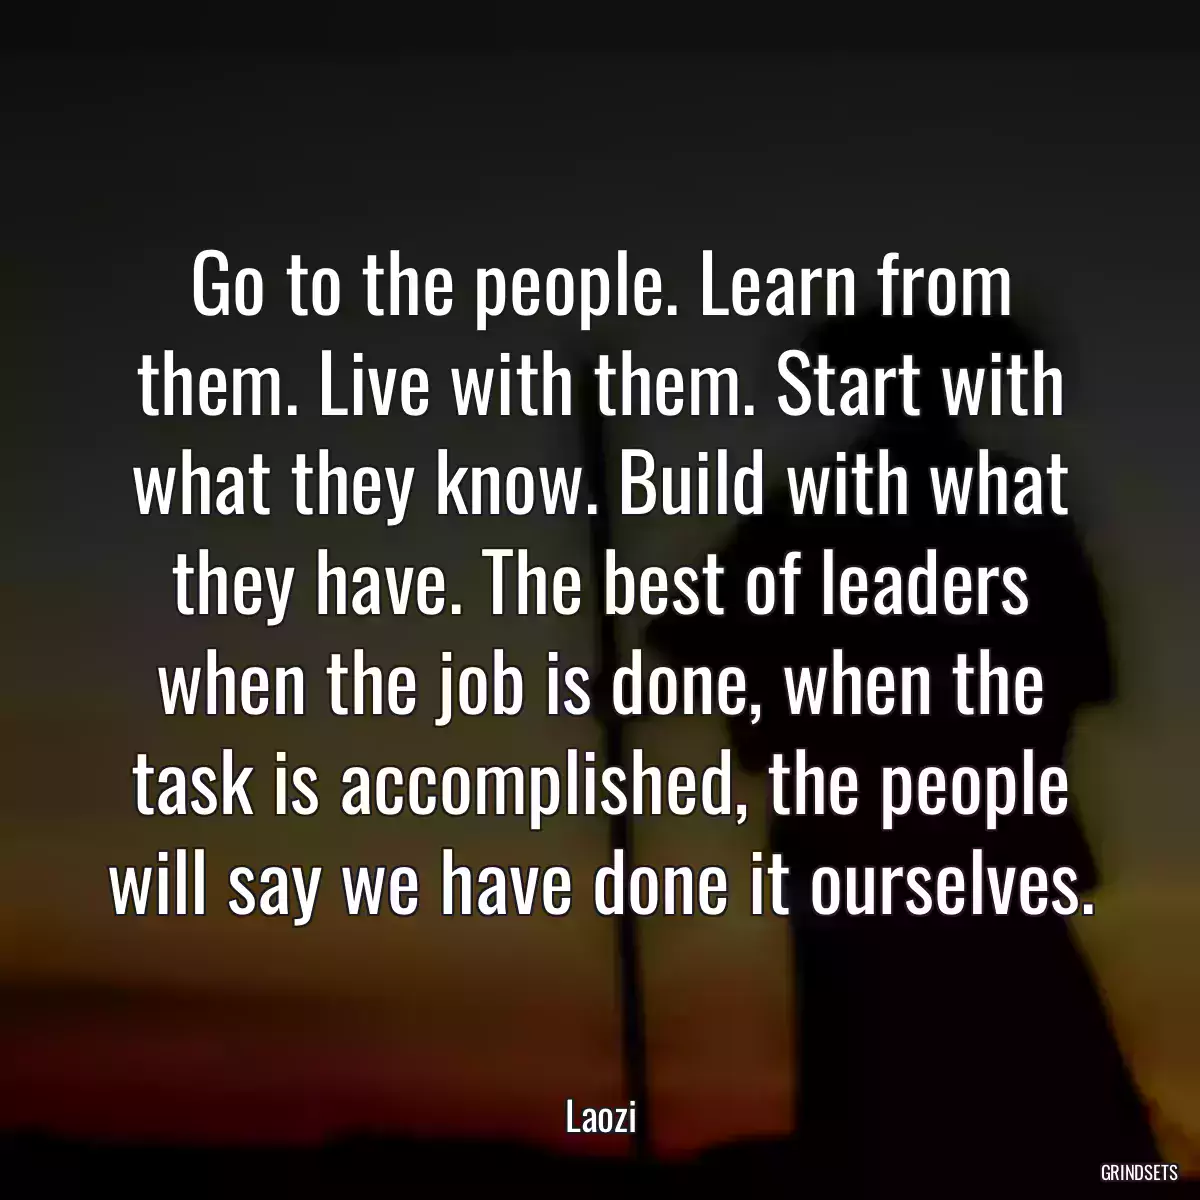 Go to the people. Learn from them. Live with them. Start with what they know. Build with what they have. The best of leaders when the job is done, when the task is accomplished, the people will say we have done it ourselves.